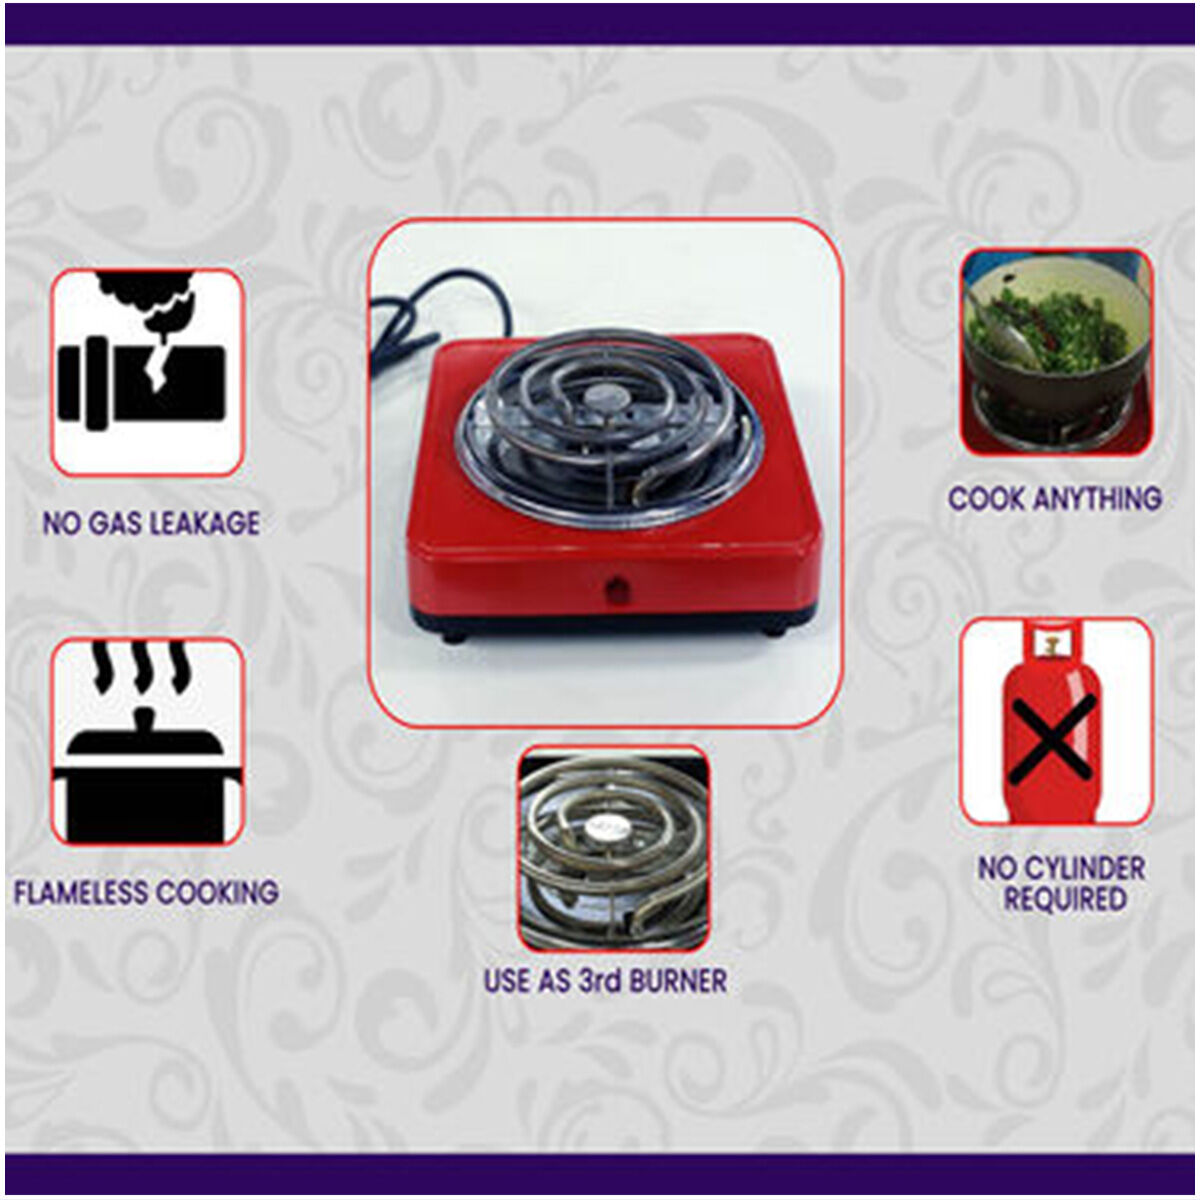 Flameless Electric Cooking stove | 500 watt | Fast Heating